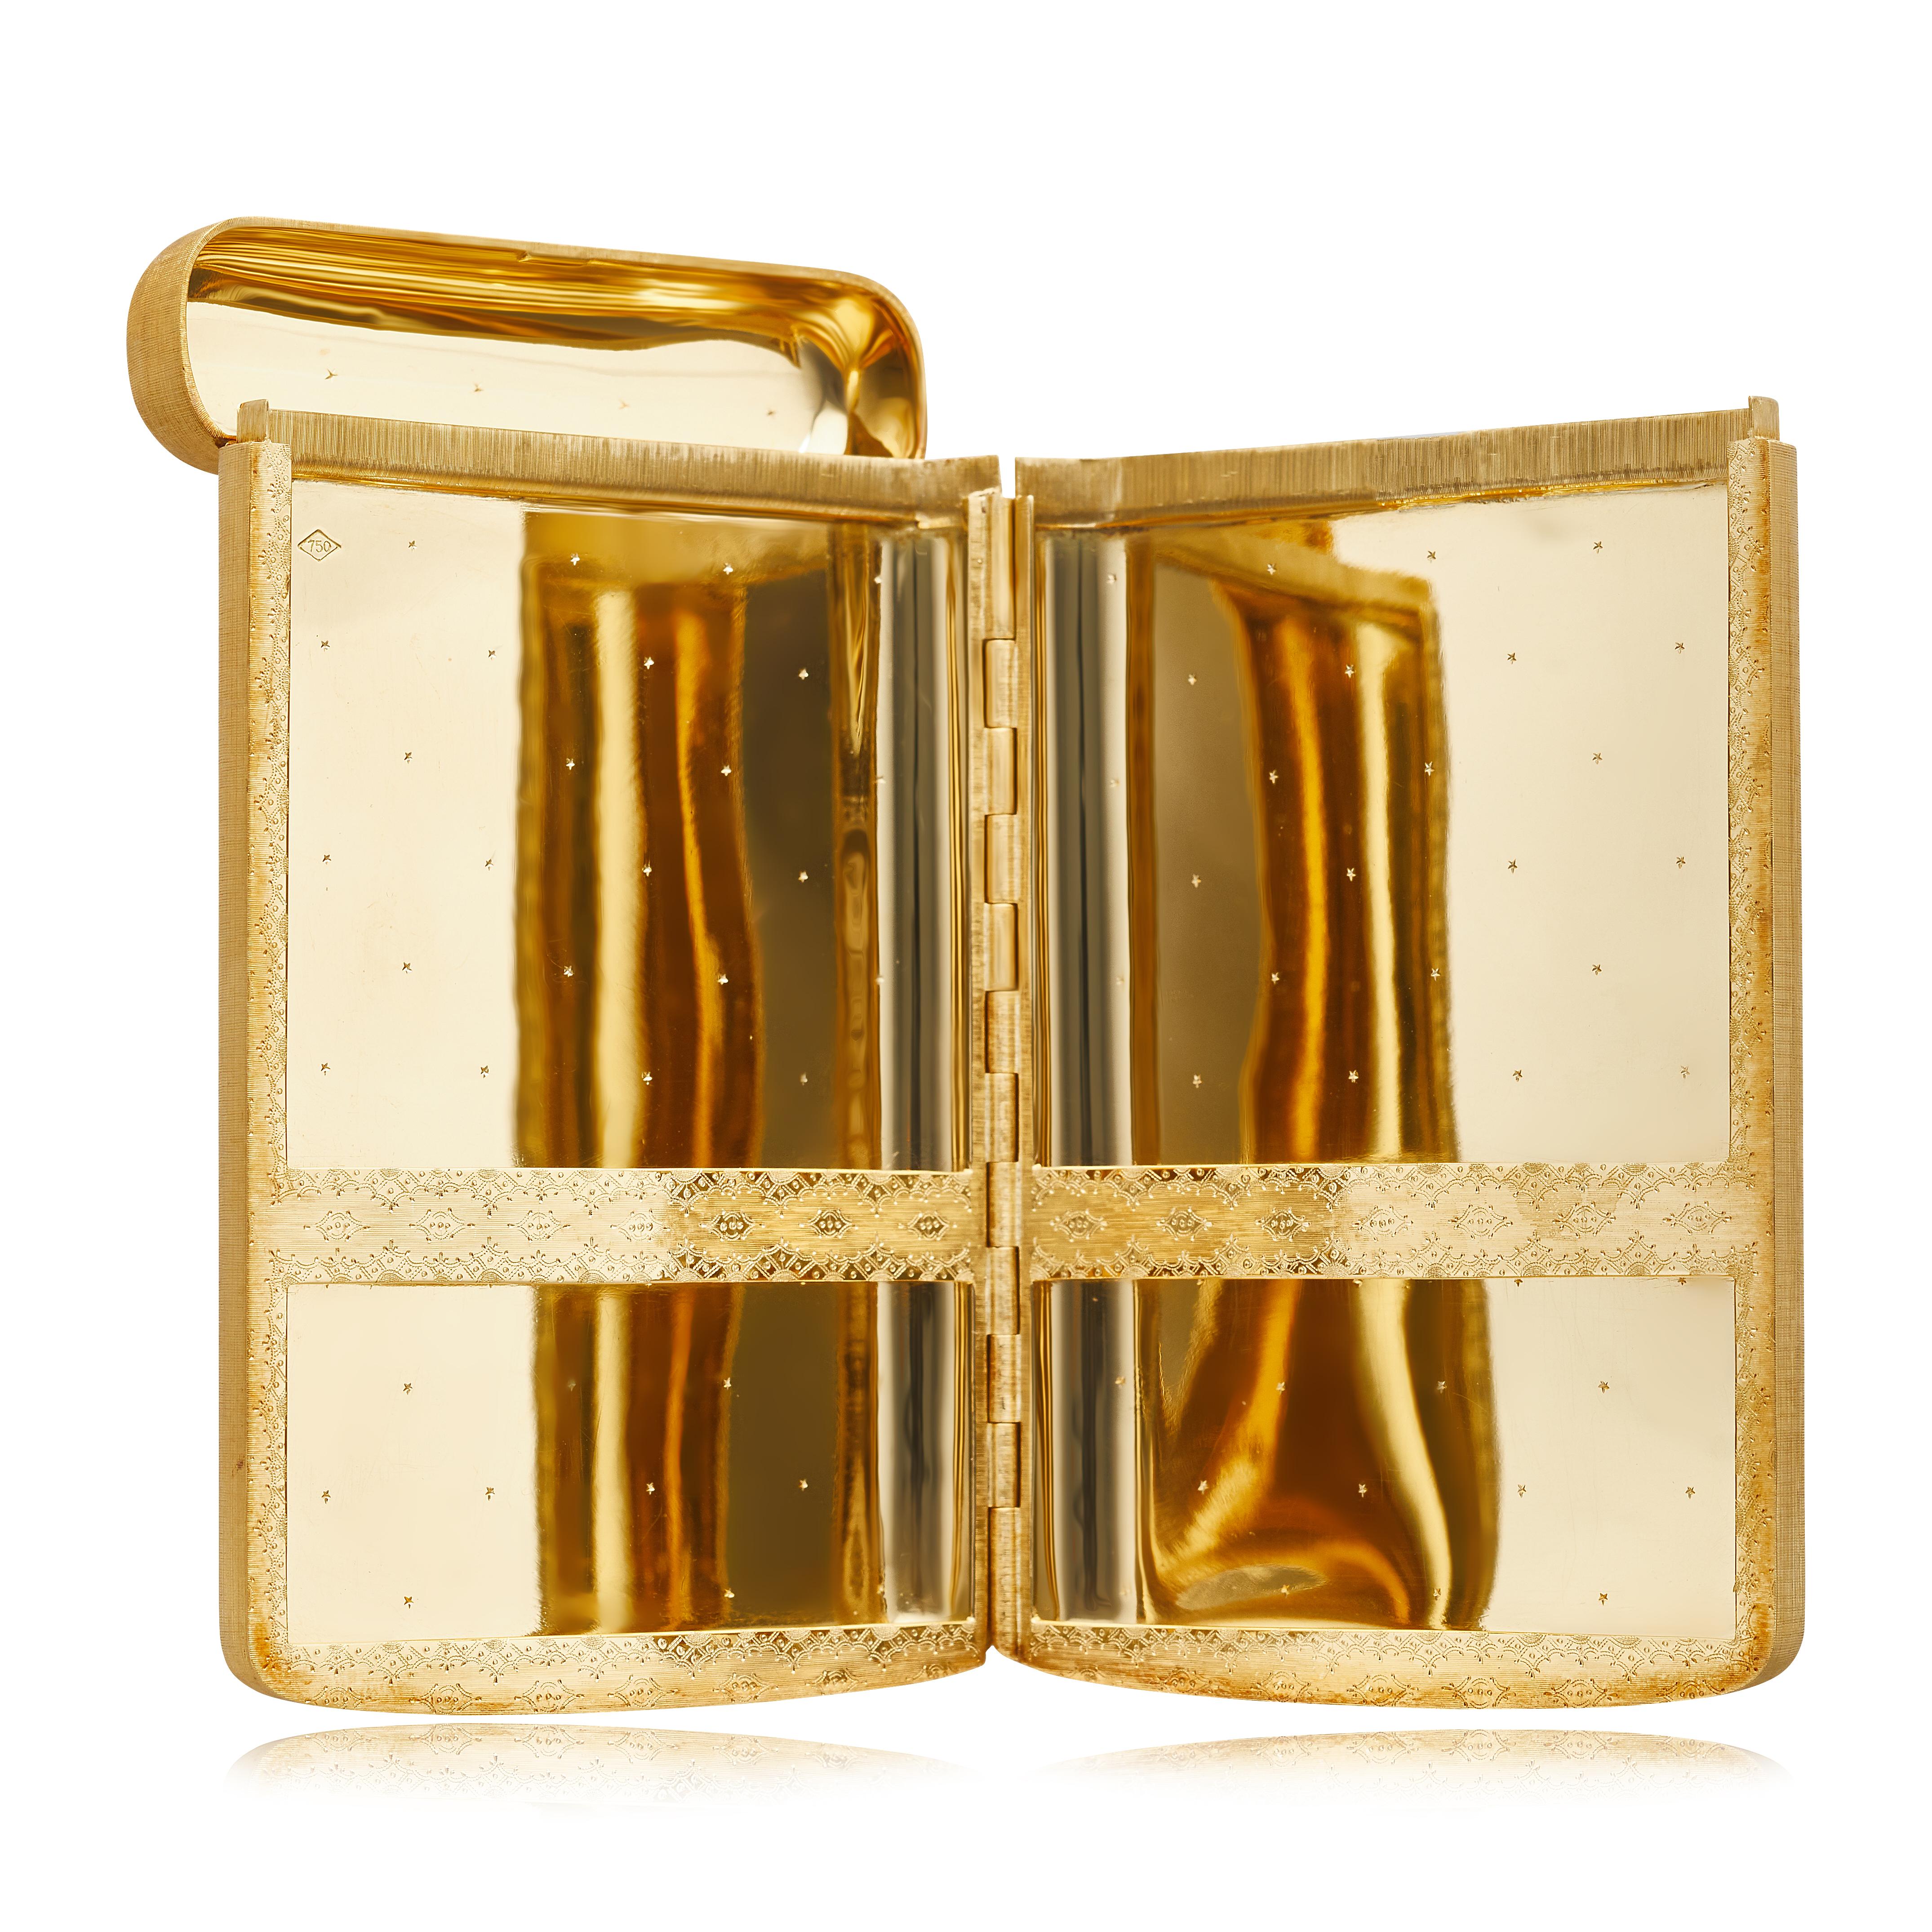 This 18 karat yellow gold Mid-Century era M. Buccellati cigarette case features a satin Florentine finish exterior and high polish interior. It is opened with a hidden clasp and includes a black case.
-	18k Yellow Gold 
-	Satin Florentine Finish